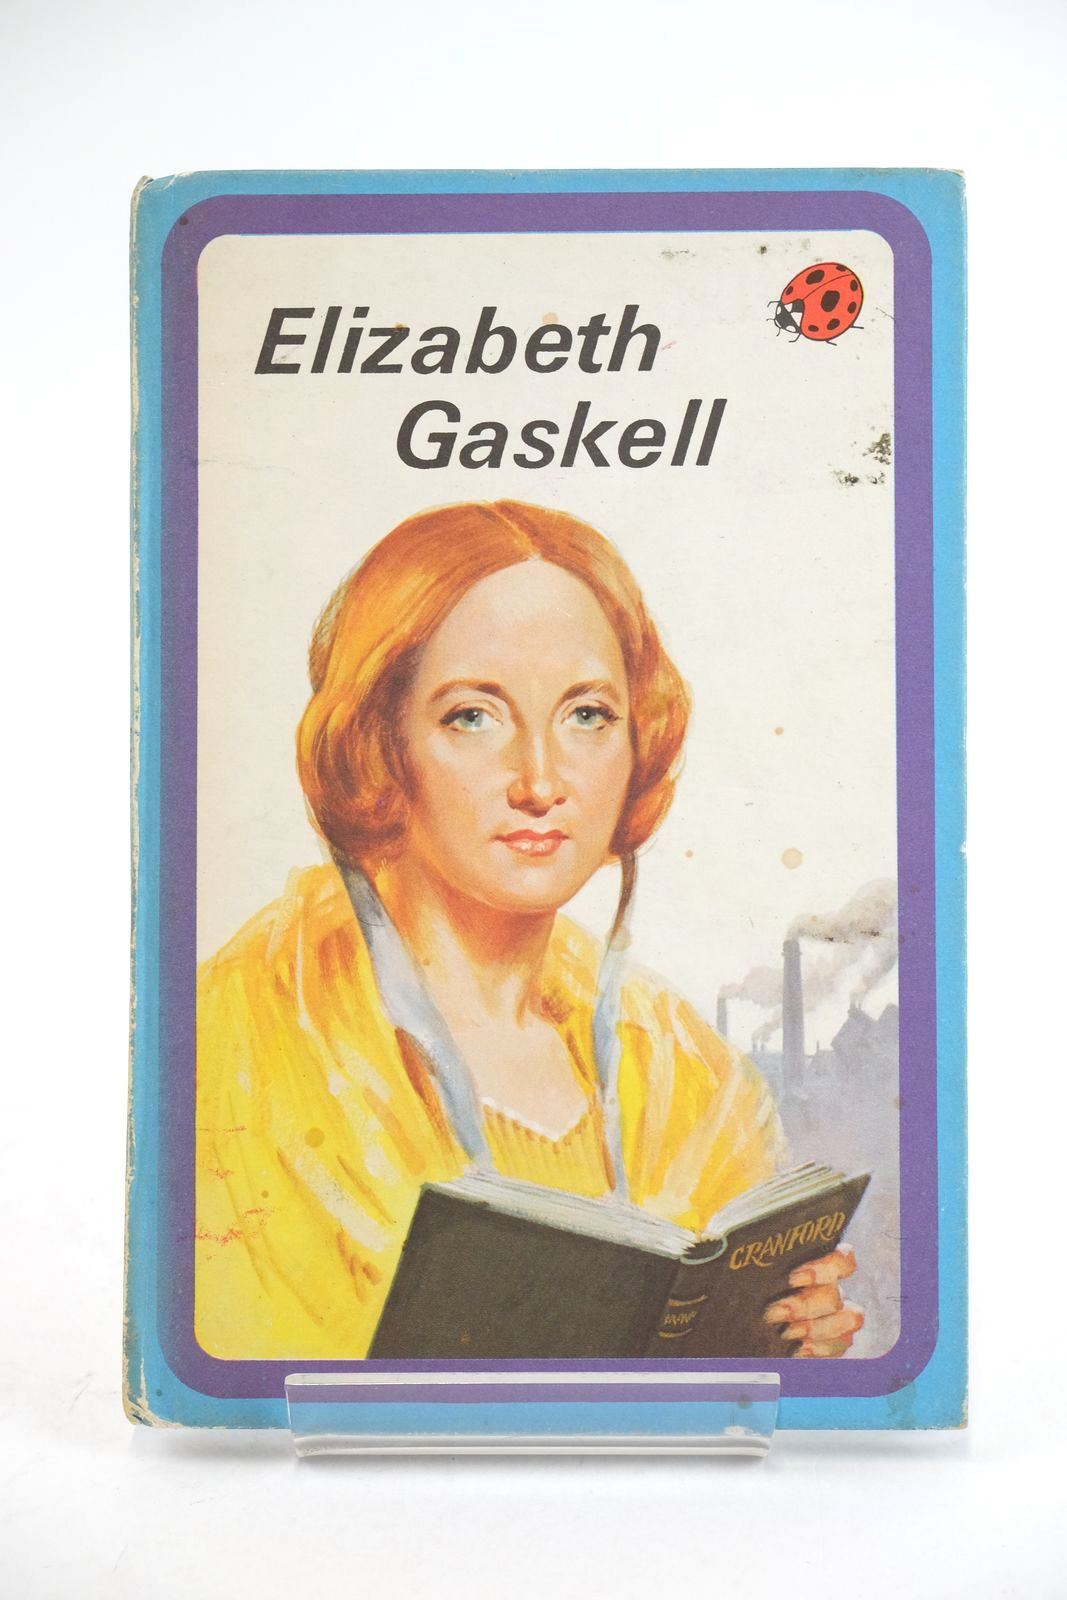 Photo of ELIZABETH GASKELL written by Brill, Barbara illustrated by Hall, Roger published by Ladybird Books (STOCK CODE: 1324398)  for sale by Stella & Rose's Books